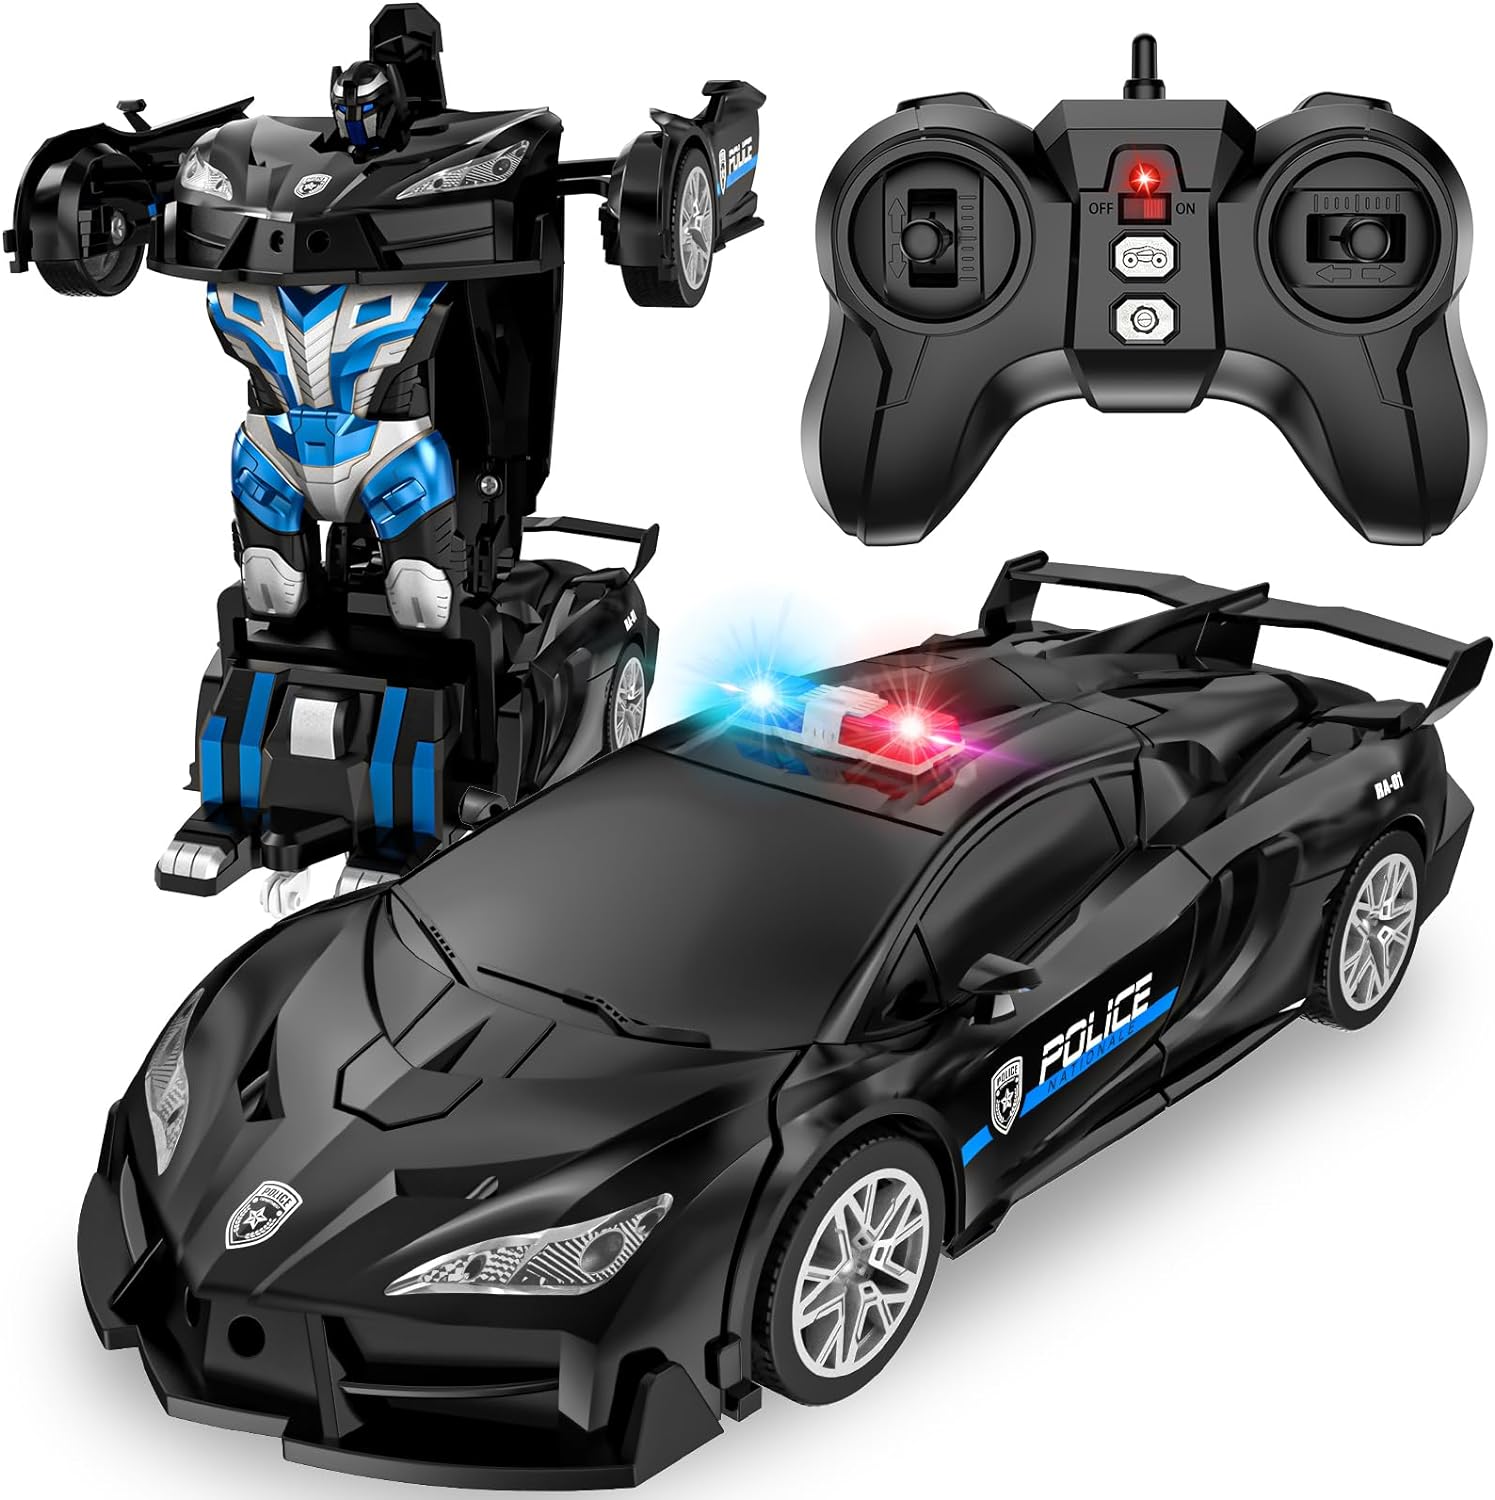 Read more about the article LNNKINE Remote Control Car Review